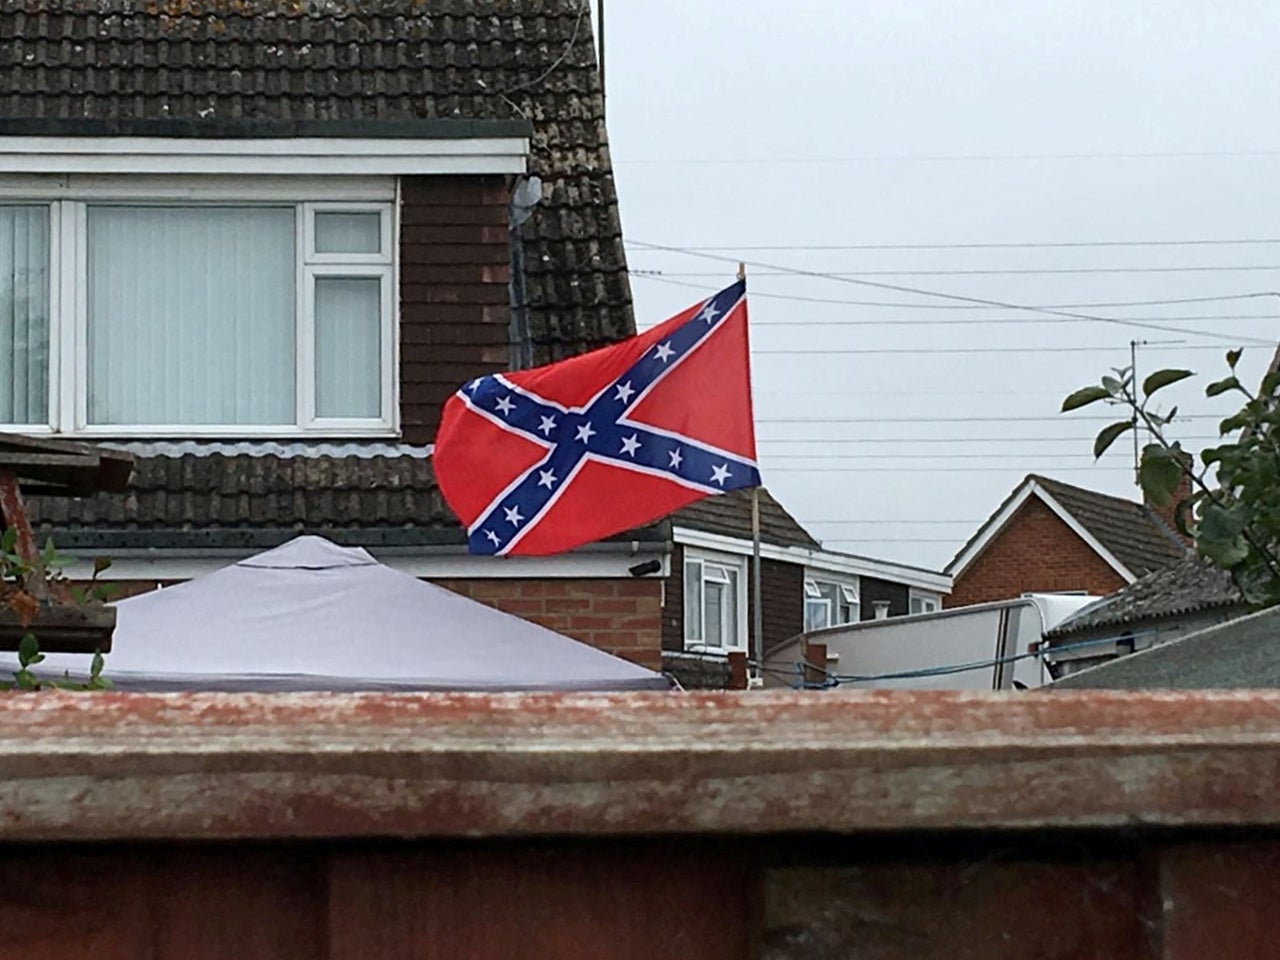 The American Confederate flag which was seen flying in Cheltenham